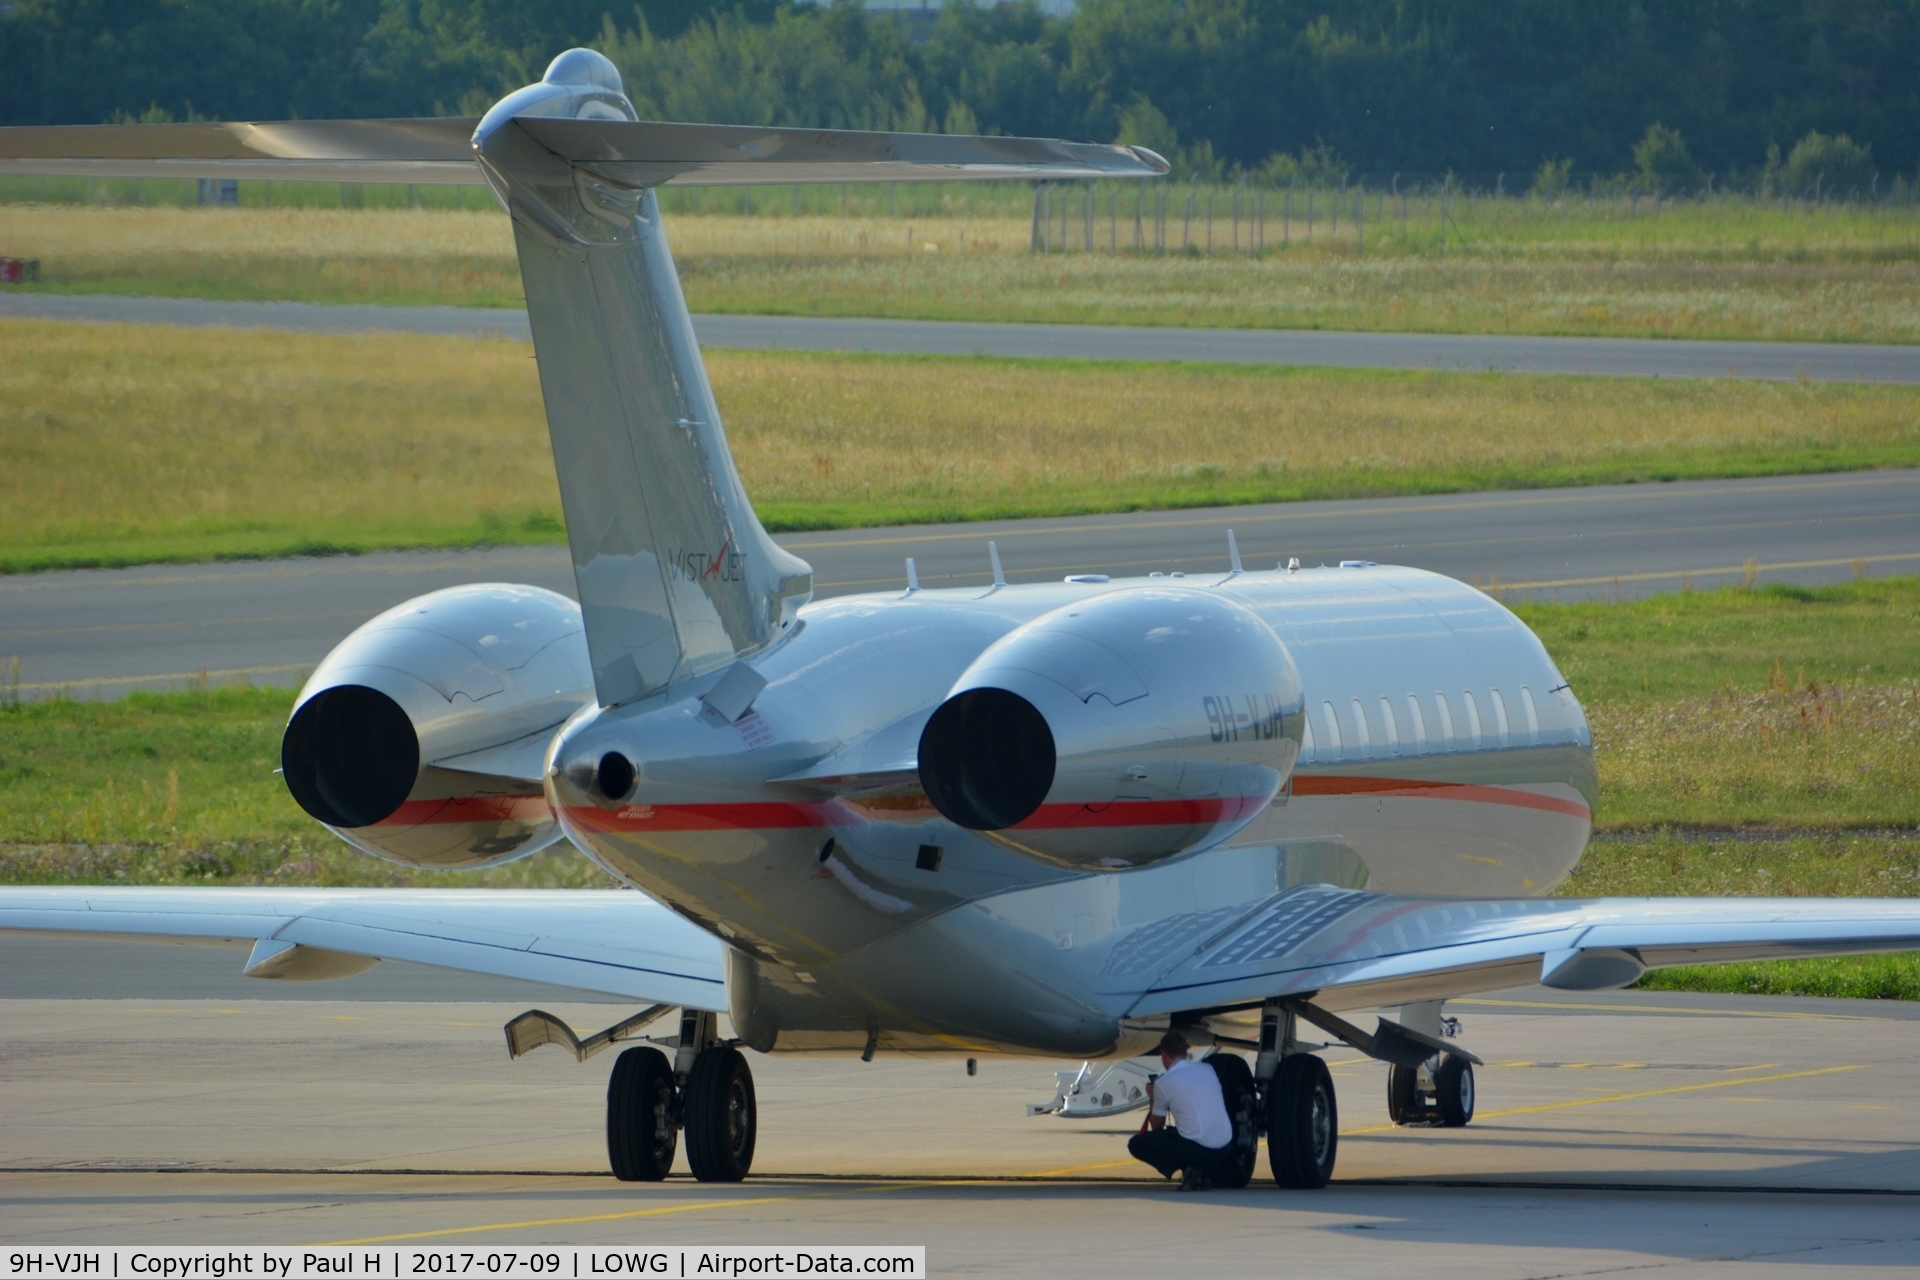 9H-VJH, 2013 Bombardier BD-700-1A10 Global 6000 C/N 9585, Global 6000 and its Pilot on the tarmac